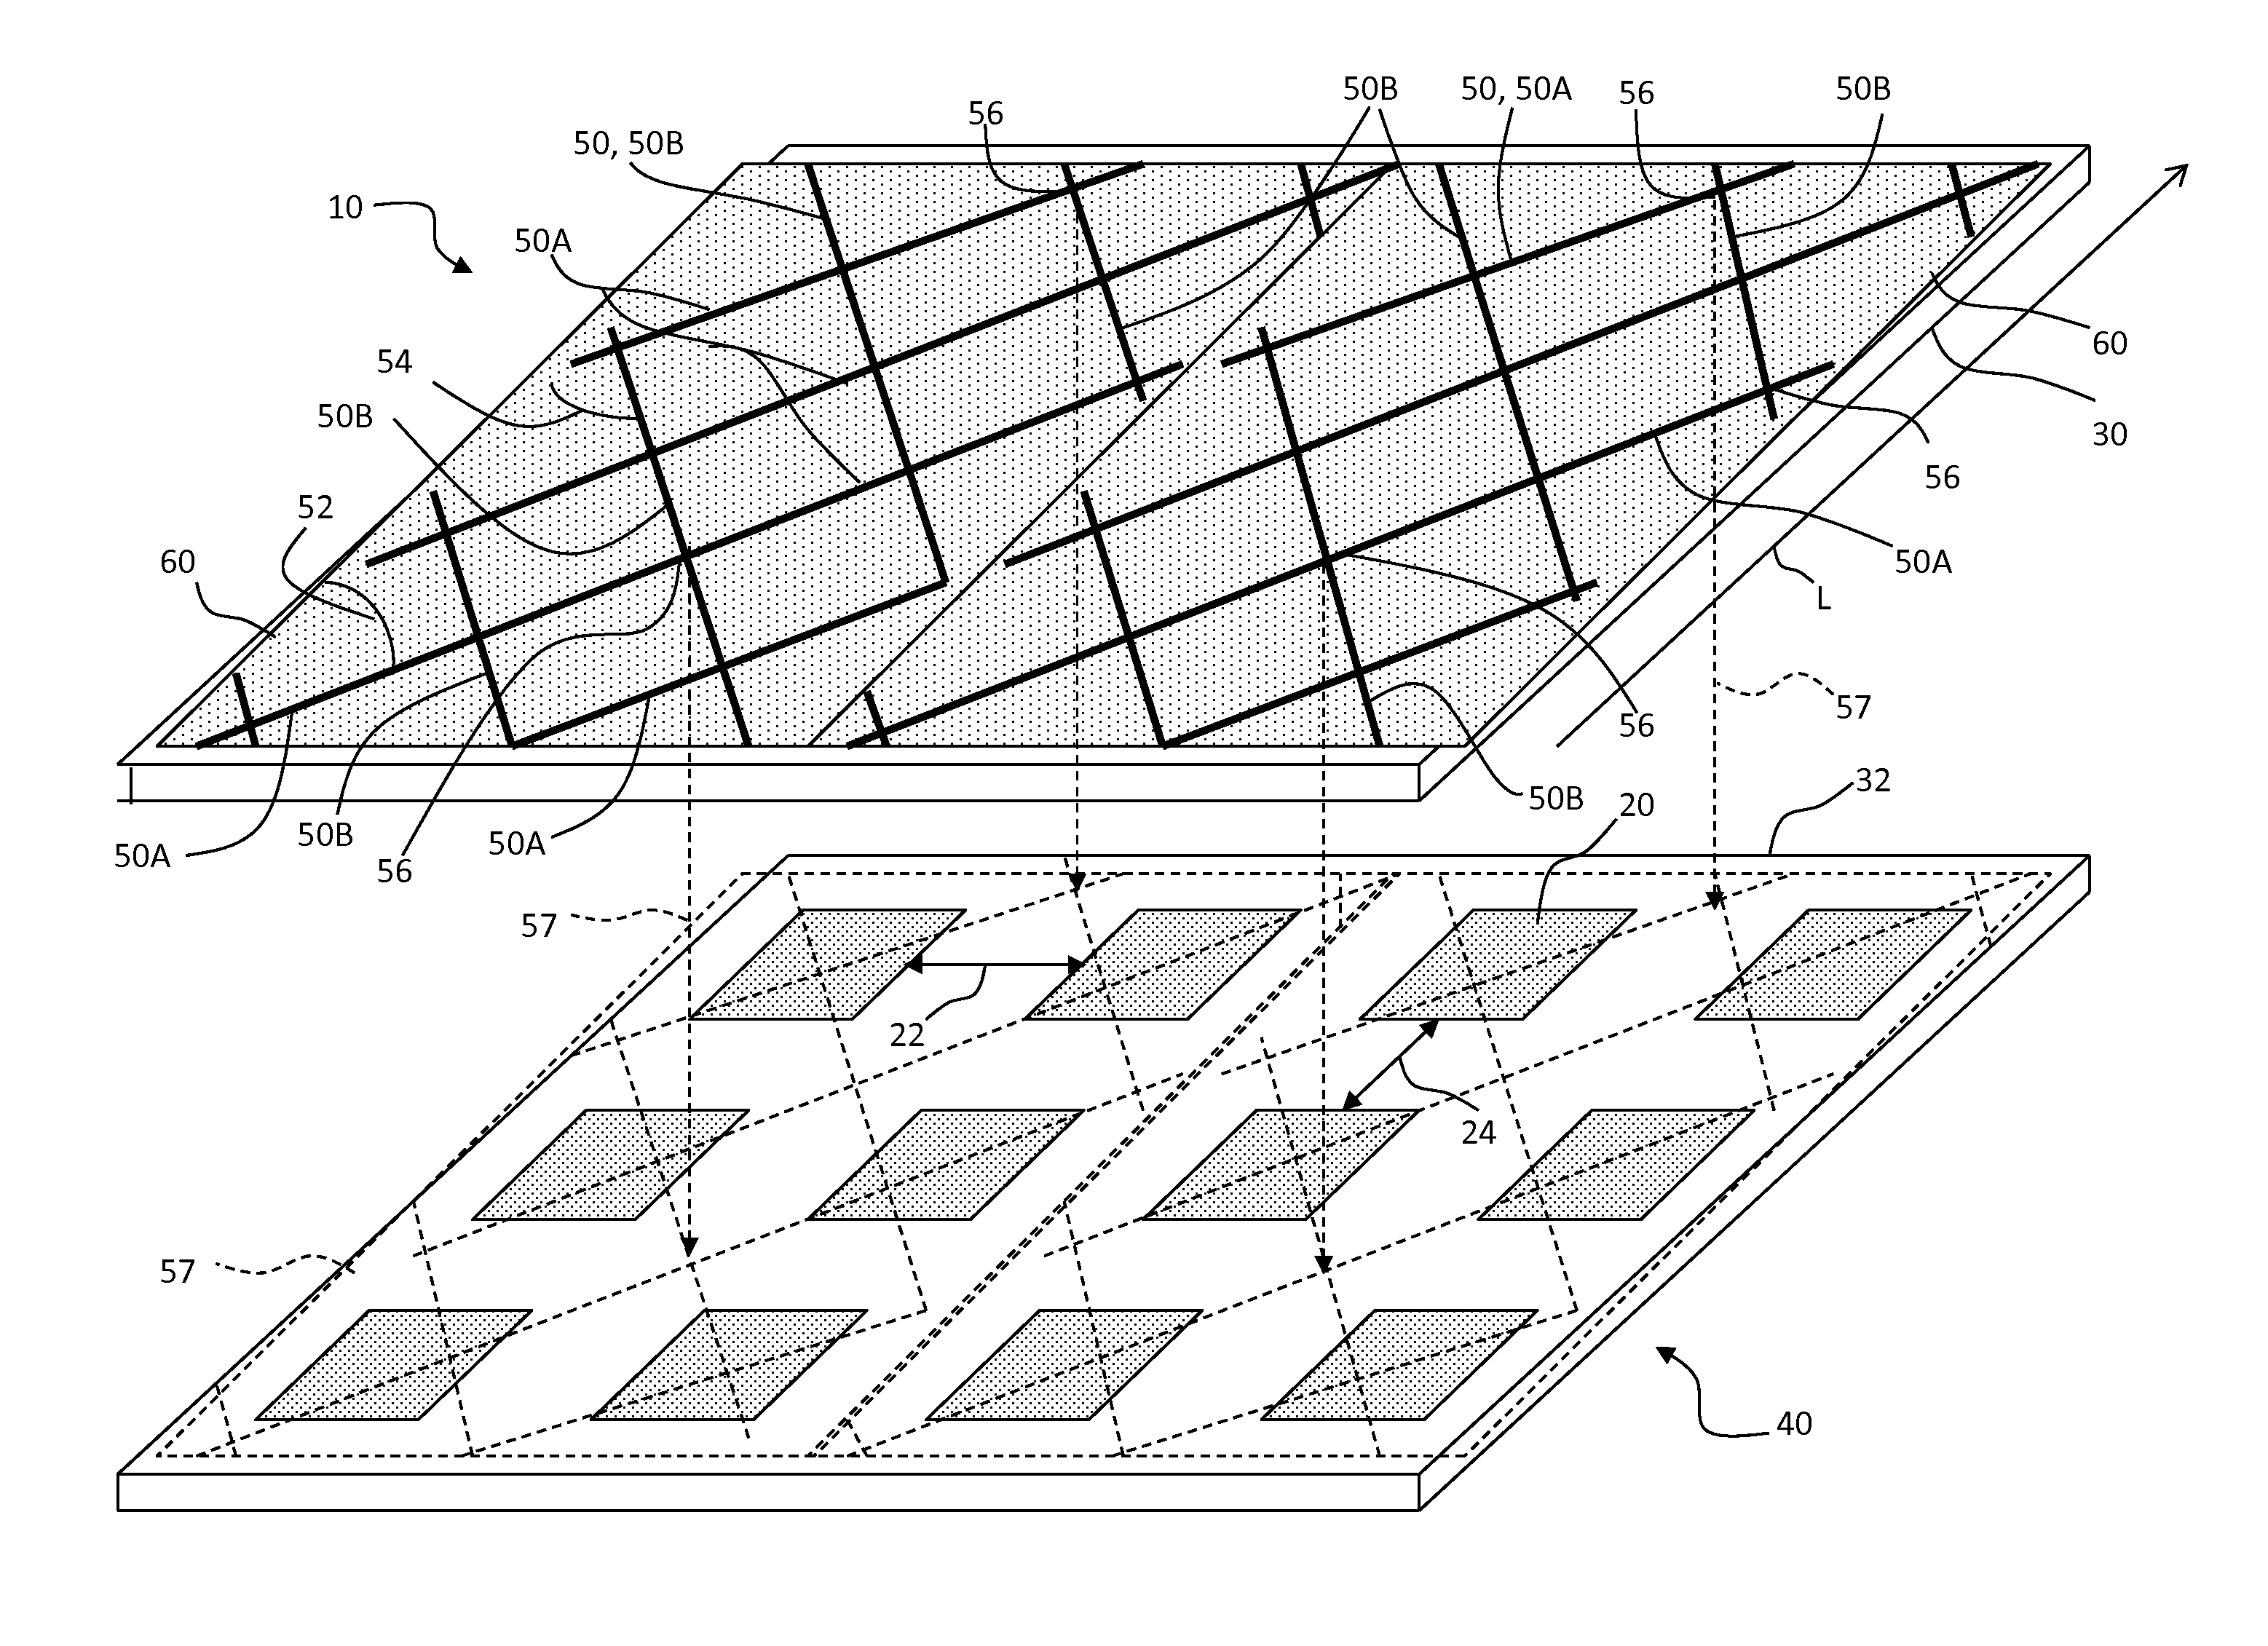 Display apparatus with diamond-patterned micro-wire electrode